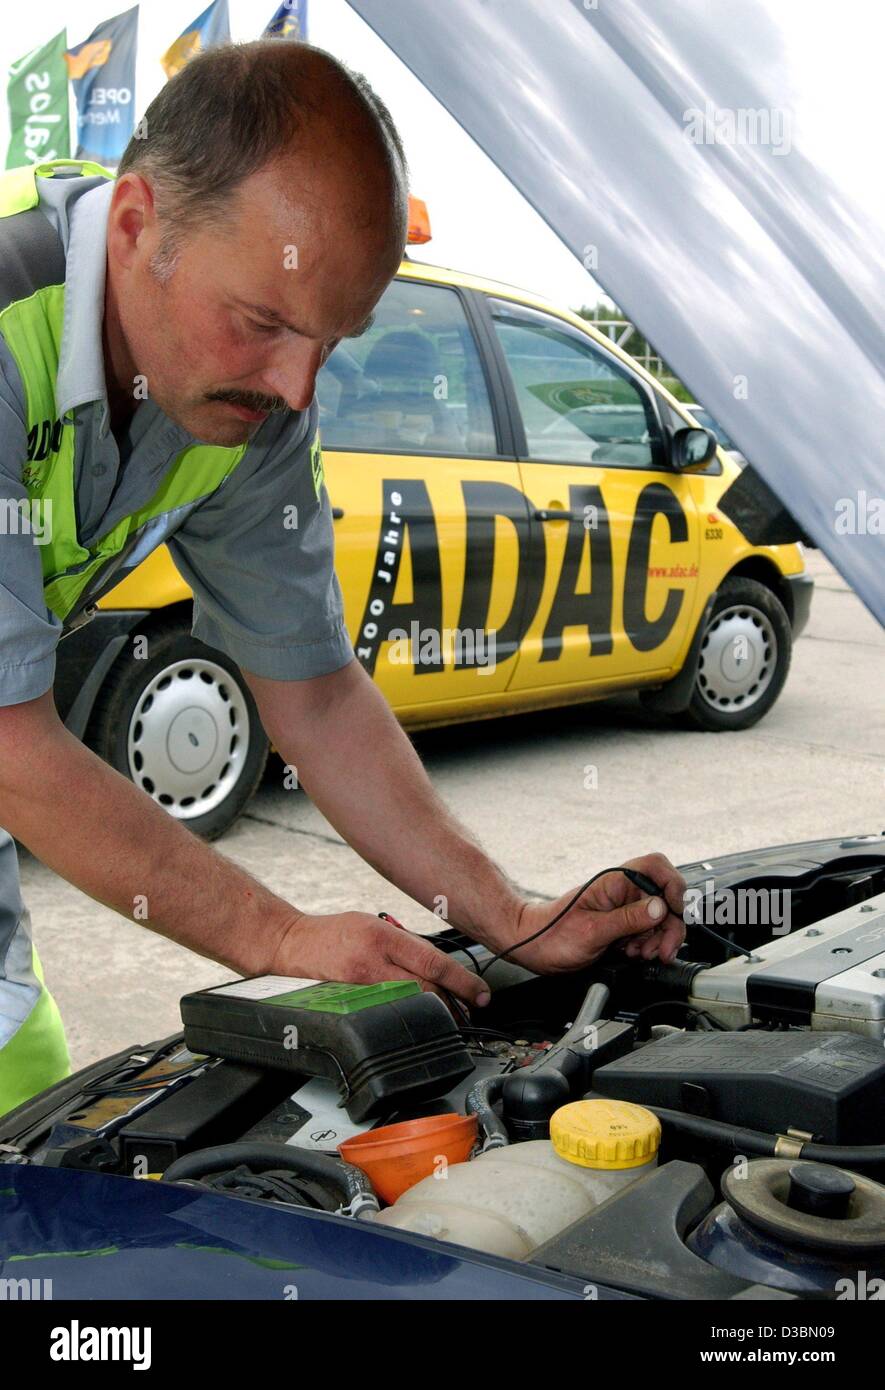 (dpa) - Harald Idzakowsky of the German auto club ADAC gives roadside assistance to a car in Frankfurt Oder, eastern Germany, 19 May 2003. The ADAC (Allgemeiner Deutscher Automobil Club), which is Europe's largest auto club with about 14.6 million members, celebrates its 100th anniversary this year. Stock Photo